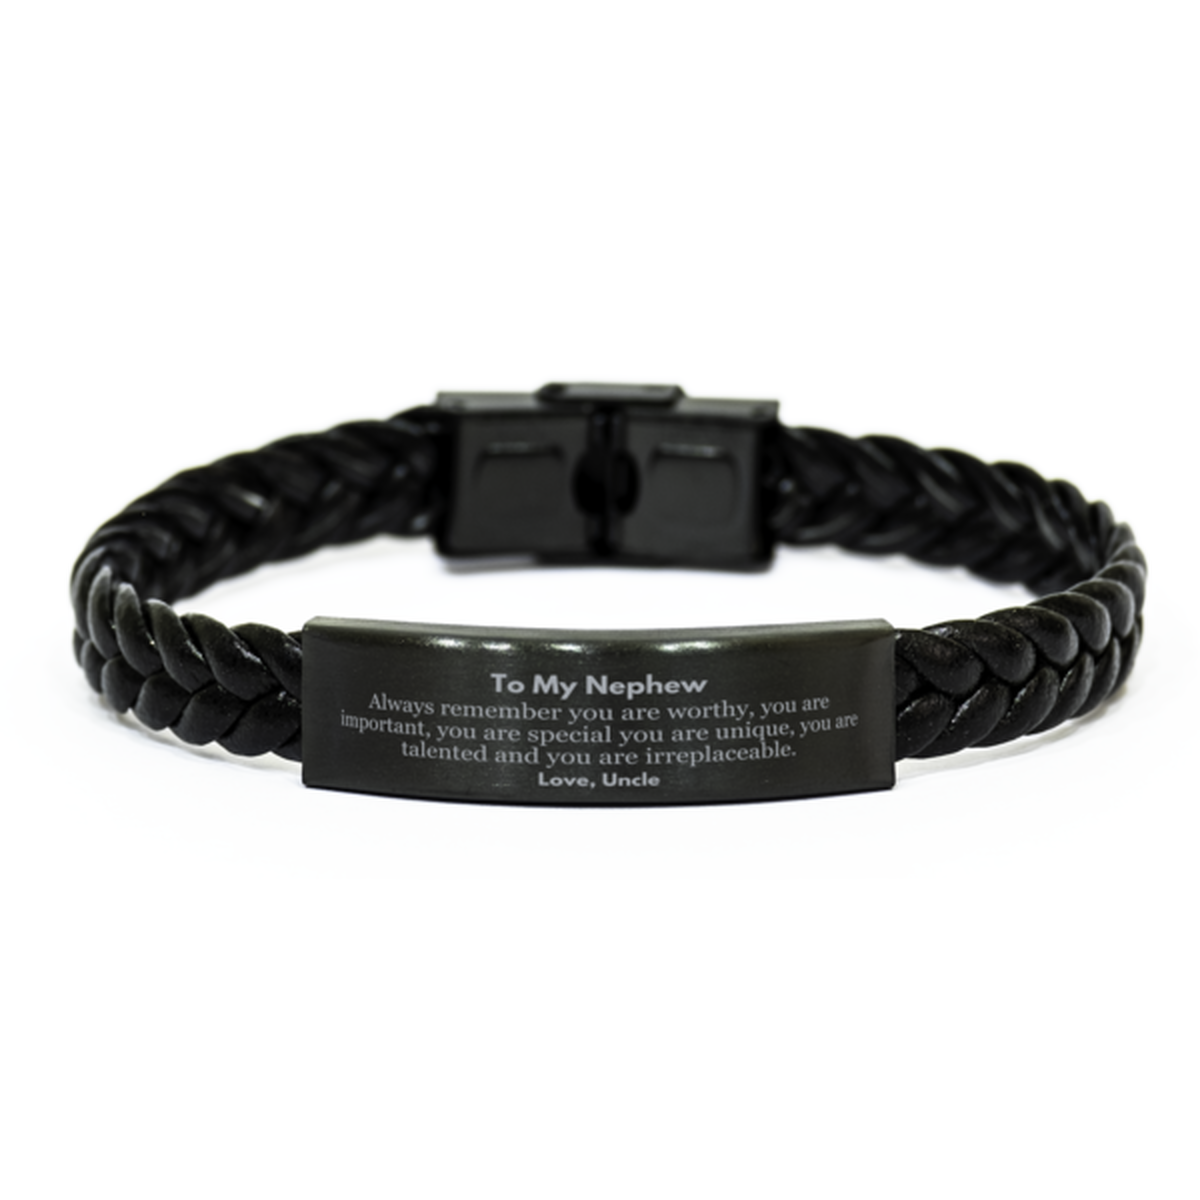 Nephew Birthday Gifts from Uncle, Inspirational Braided Leather Bracelet for Nephew Christmas Graduation Gifts for Nephew Always remember you are worthy, you are important. Love, Uncle